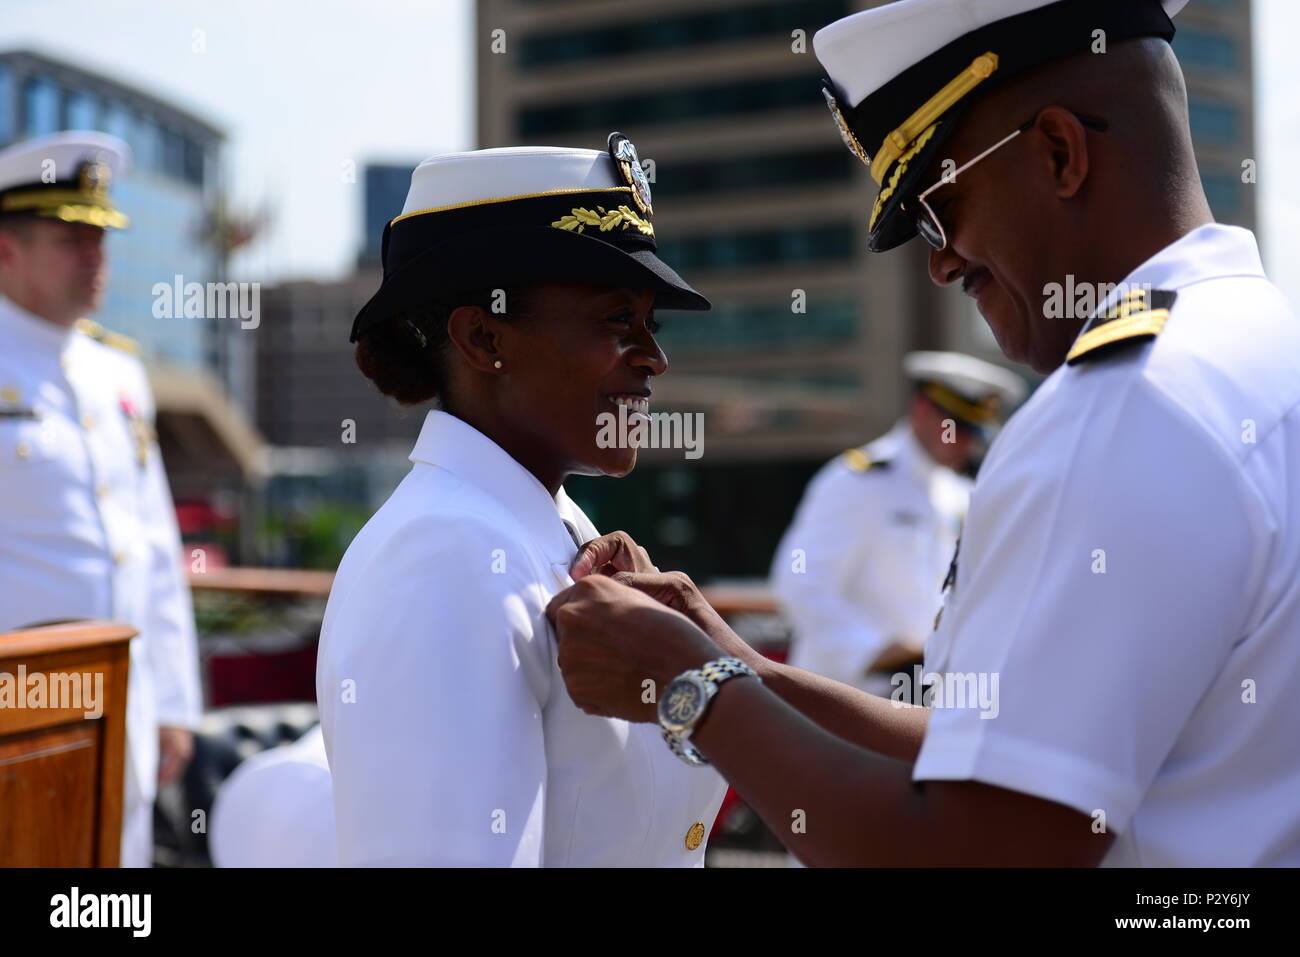 160806-N-DD899-209 BALTIMORE, Md. (Aug. 8, 2016) Cmdr. Tasya Lacy, left, commanding officer of Navy Operational Support Center (NOSC) Batimore, is pinned by her husband, Cmdr. Herb Lacy, right, during a change of command ceremony aboard USS Constellation in Baltimore Inner Harbor. Lacy relieved Cmdr. John B. Downes as the NOSC Baltimore commanding officer. (U.S. Navy photo by Mass Communication Specialist 1st Class Sharay Bennett/Released) Stock Photo